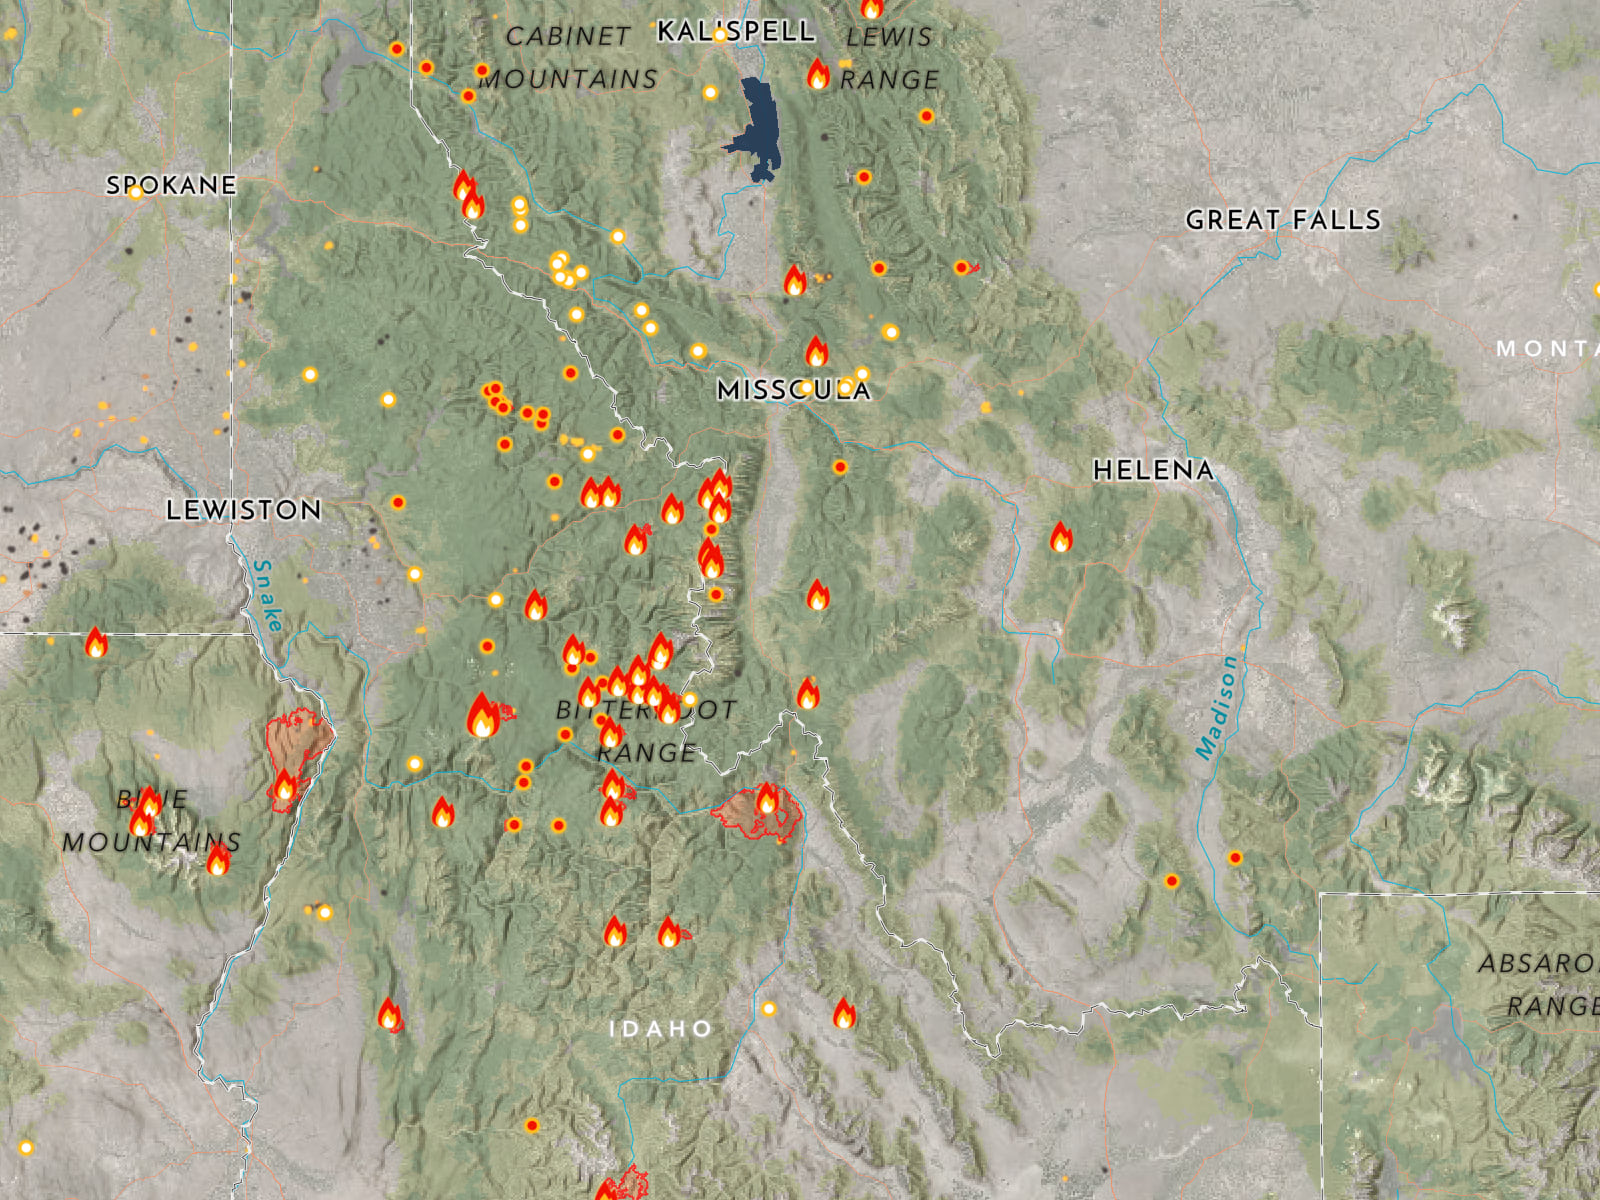 The basemap balances landforms and labels to set a context for wildfire symbols.